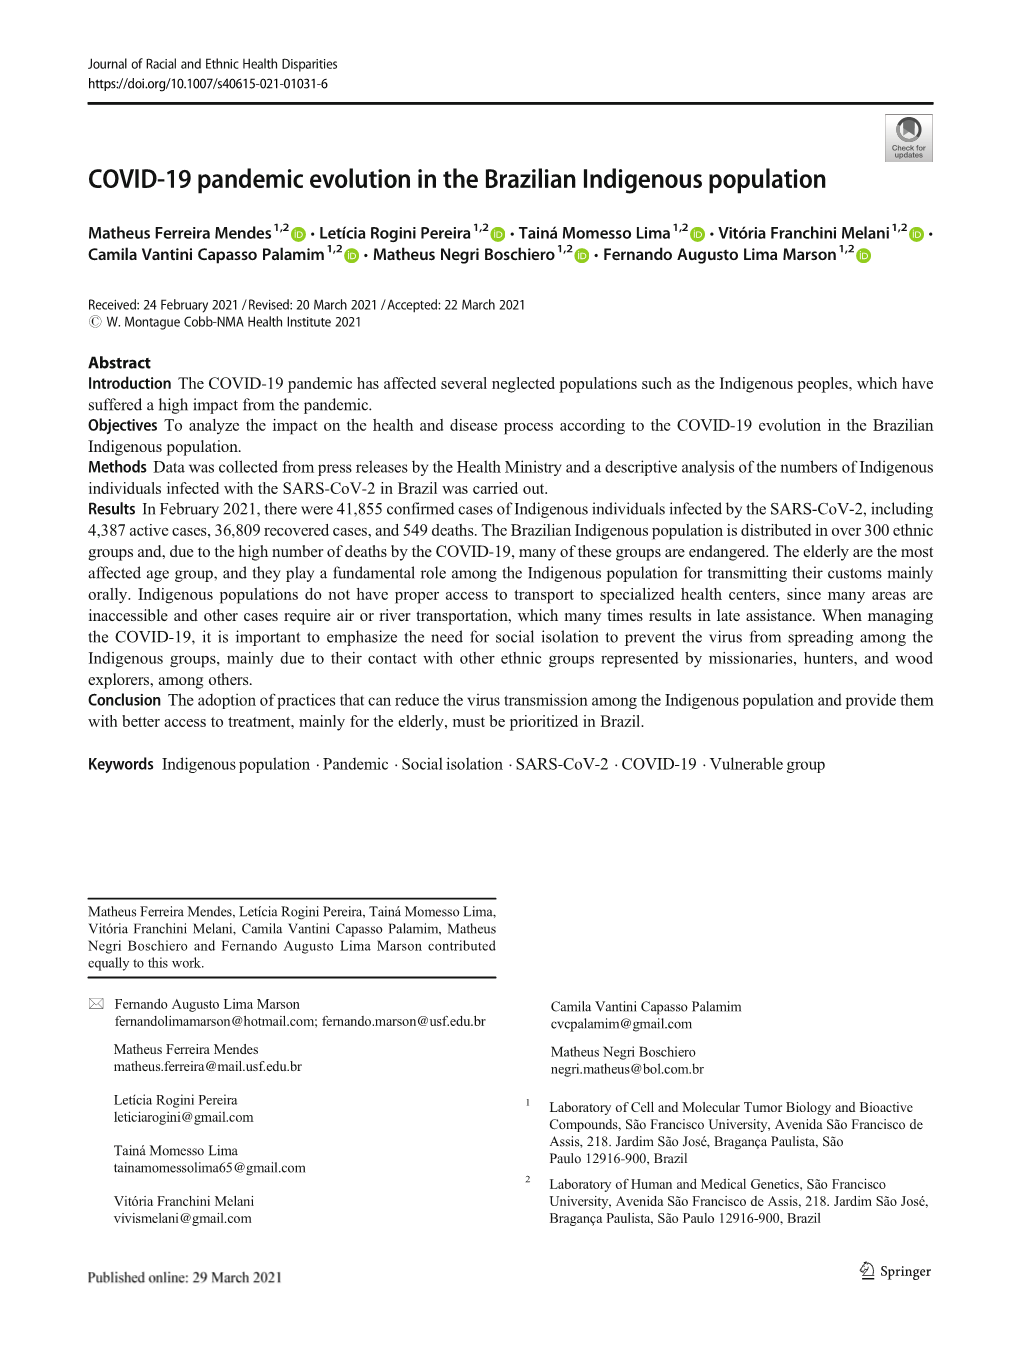 COVID-19 Pandemic Evolution in the Brazilian Indigenous Population